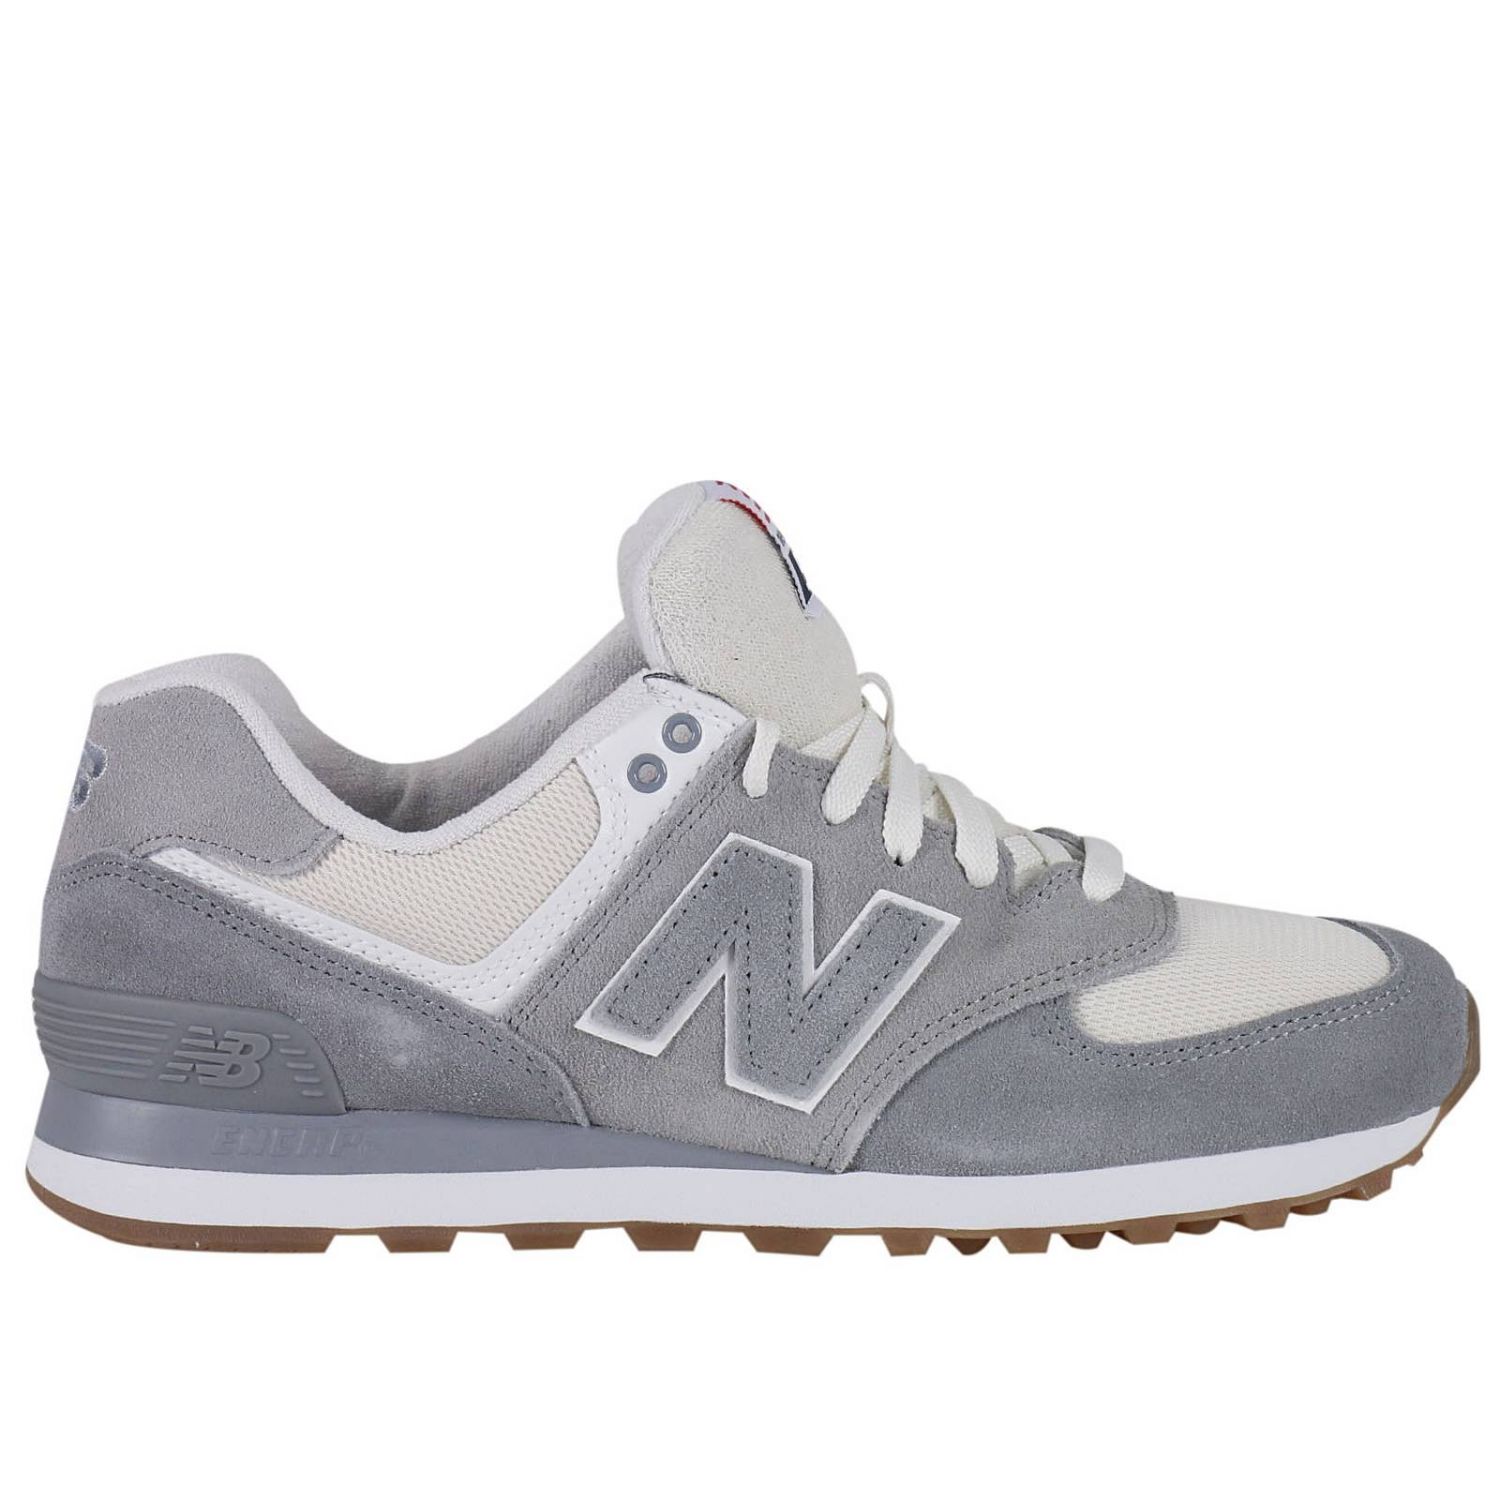 New Balance Ml574rsa Online Sale, UP TO 67% OFF